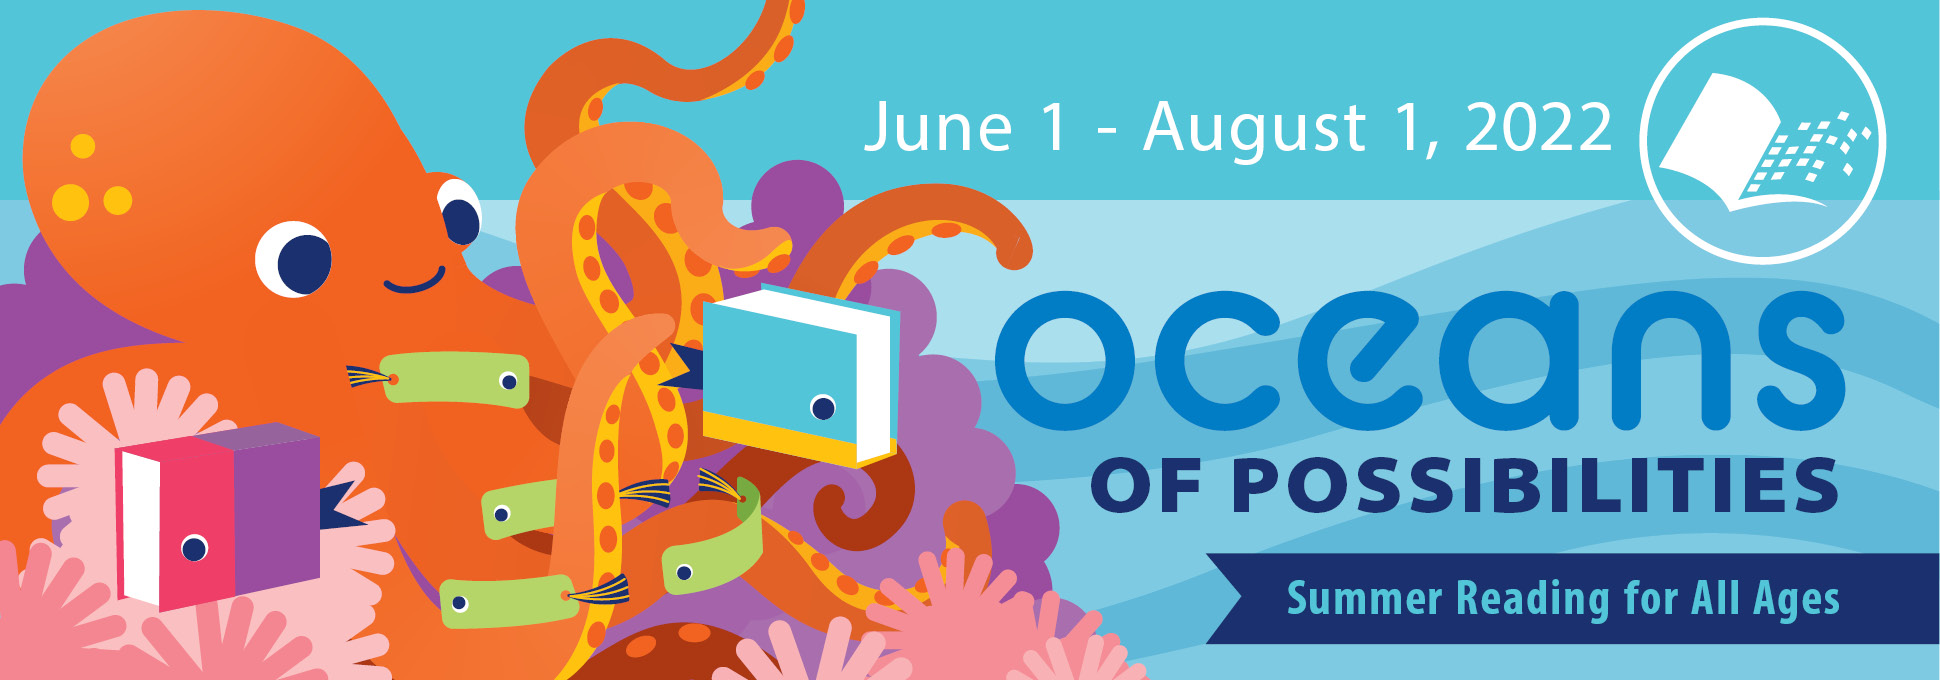 Oceans of Possibilities, Summer Reading for All Ages June 1 - August 1